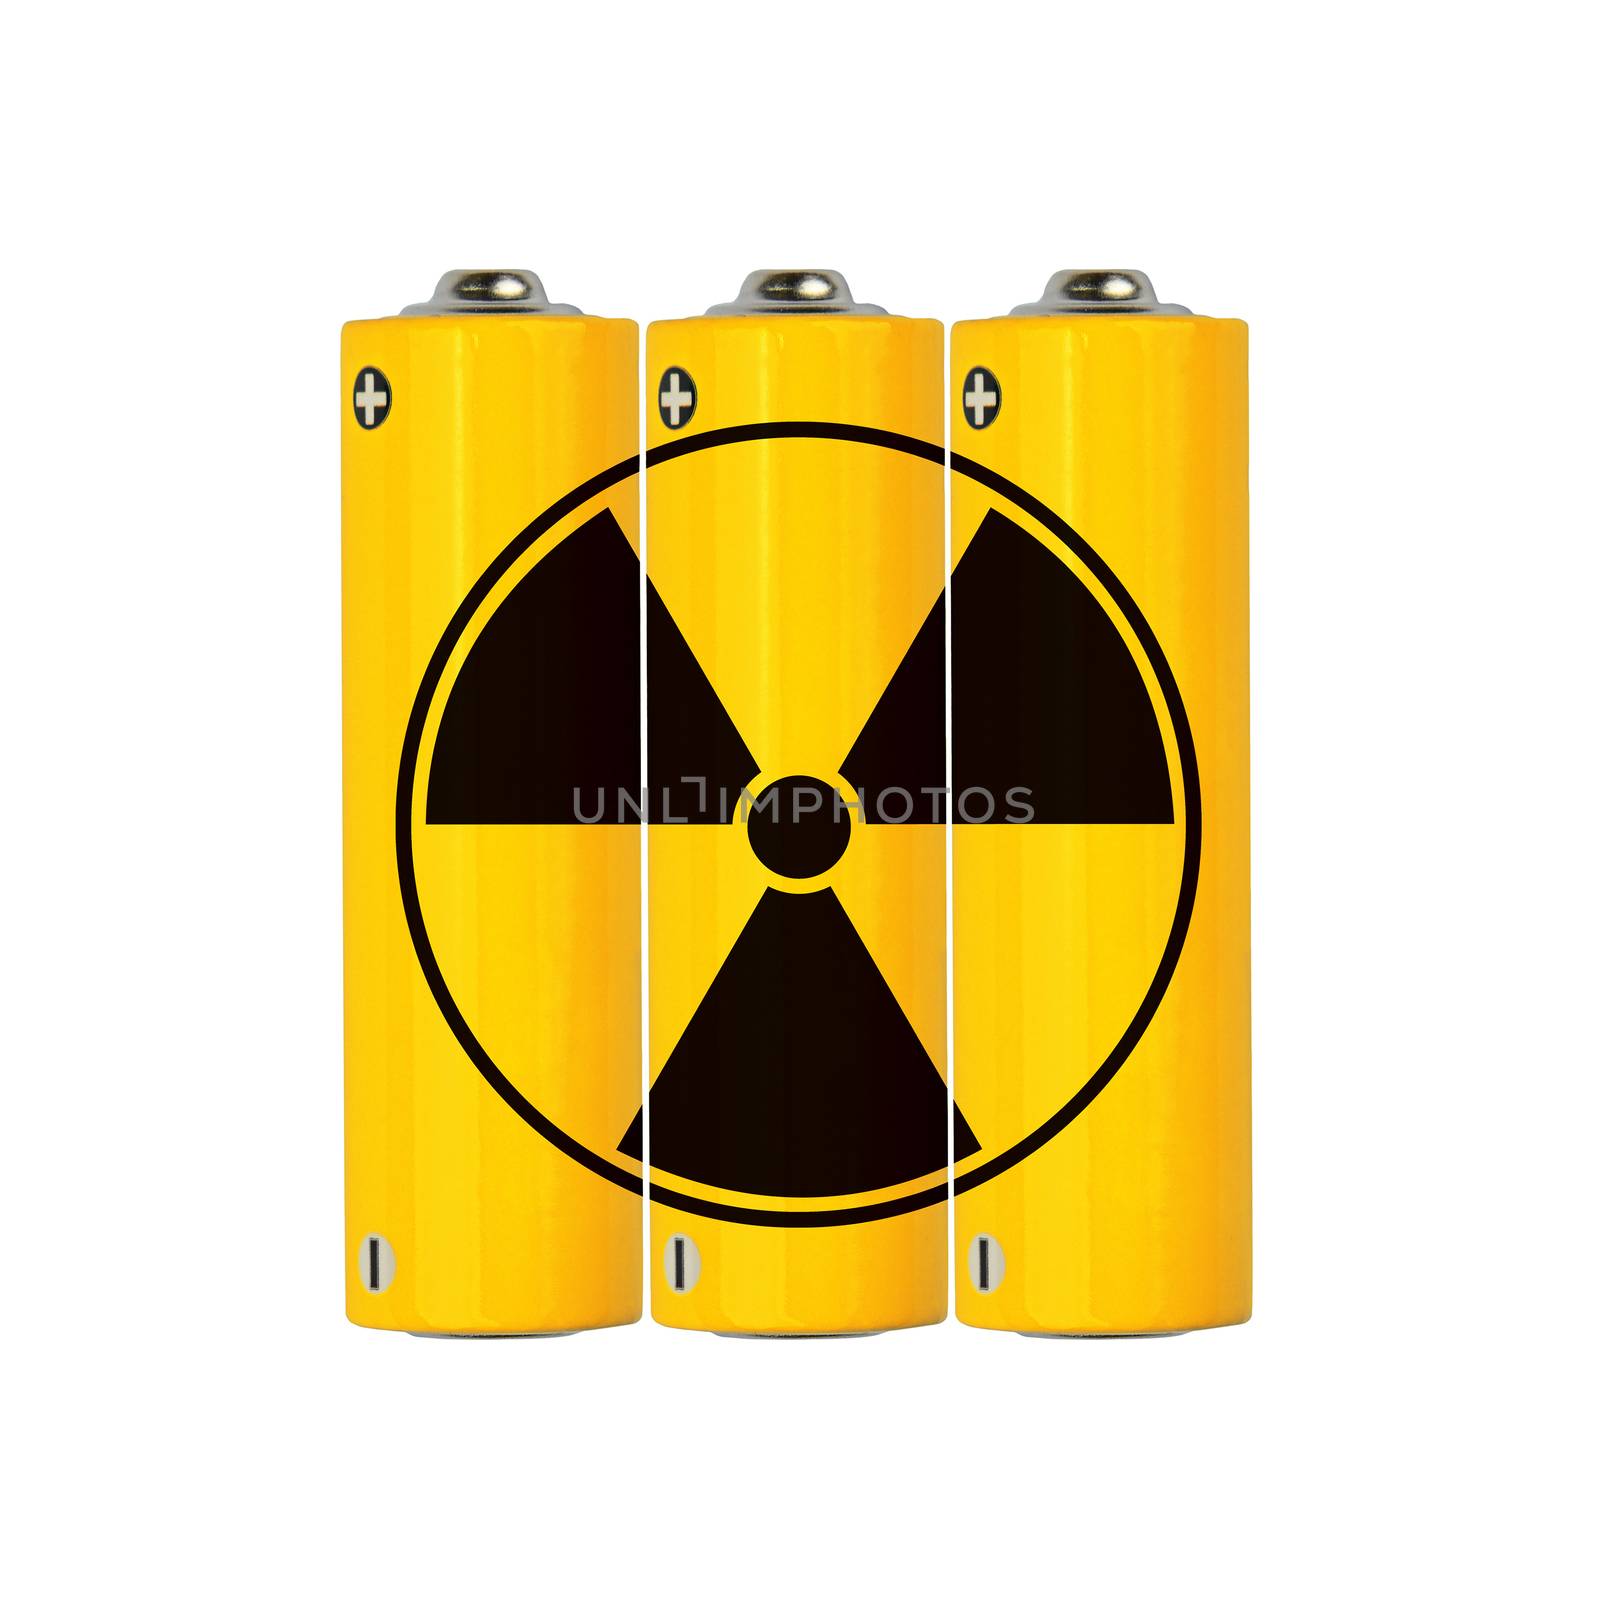 Close up group of vivid yellow alkaline AA batteries with black radioactive danger sign isolated on white background